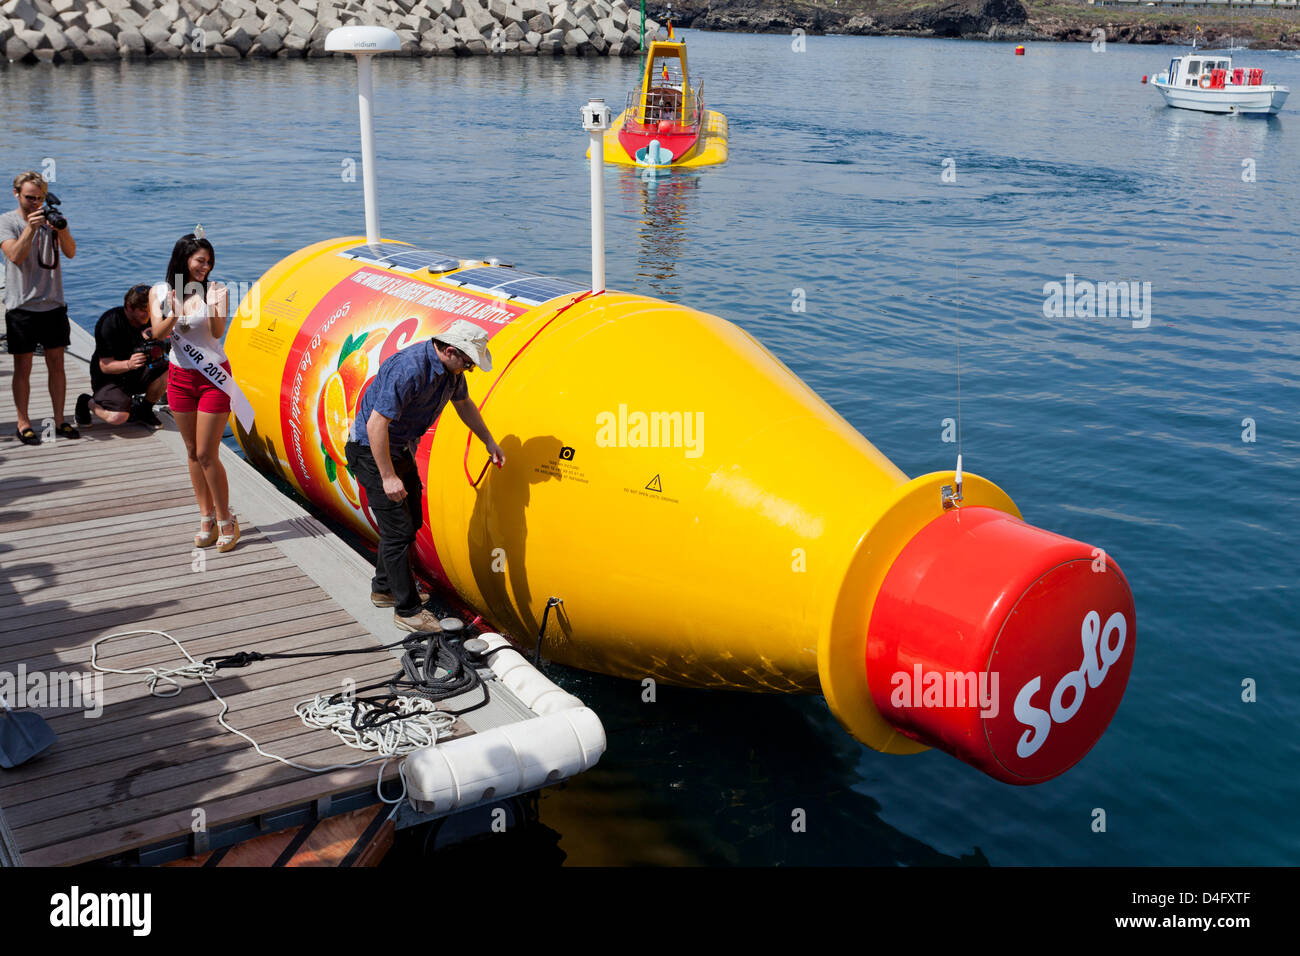 Tenerife. 13th March 2013. Jarle Andhoy and Sady Chavez, Miss Tenerife Sur at The official launch of world's biggest message in a bottle took place at San Miguel Marina. The launch ceremony conducted by Miss Tenerife Sur, Sady Chavez, and the Norwegian polar explorer Jarle Andhoy who ceremoniously broke a bottle of Solo soda pop to mark the occasion. The bottlre will be towed out to sea and set adrift and whoever finds it as it comes ashore will be rewarded with a prize from the Solo soft drinks company. Credit:  Phil Crean A / Alamy Live News Stock Photo